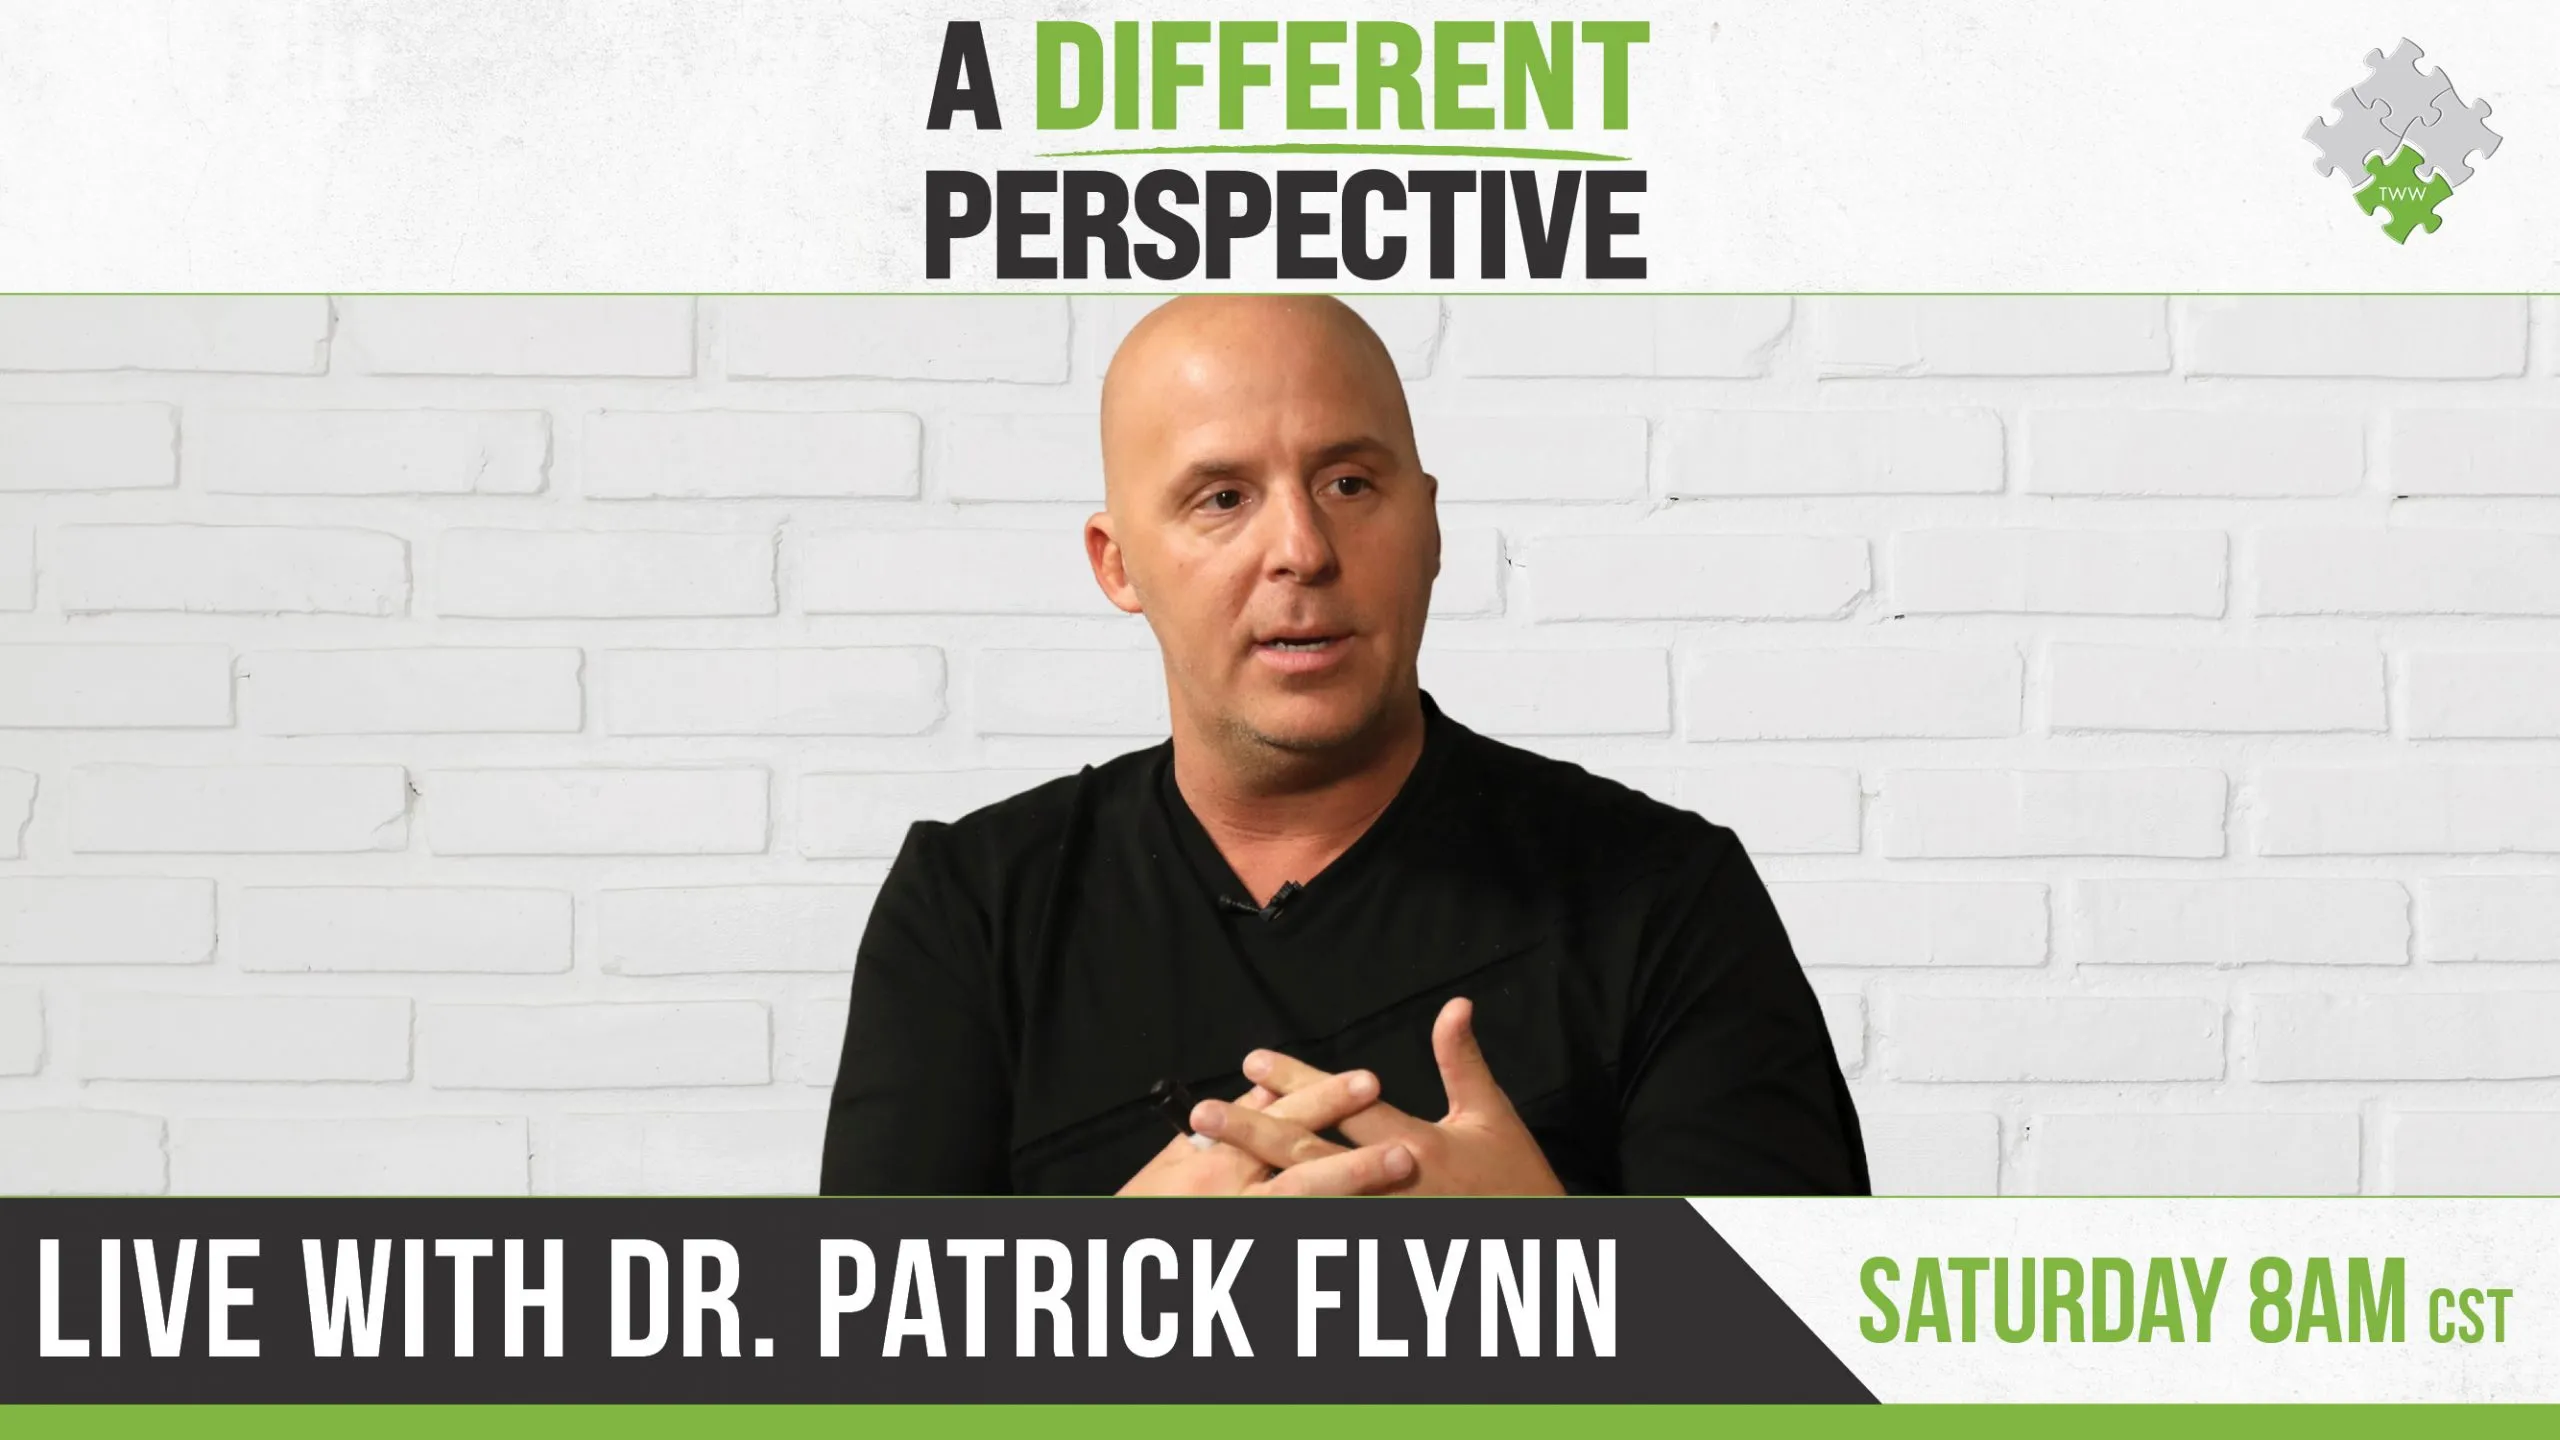 8.20.22 – “A Different Perspective with Dr. Patrick Flynn” Recap